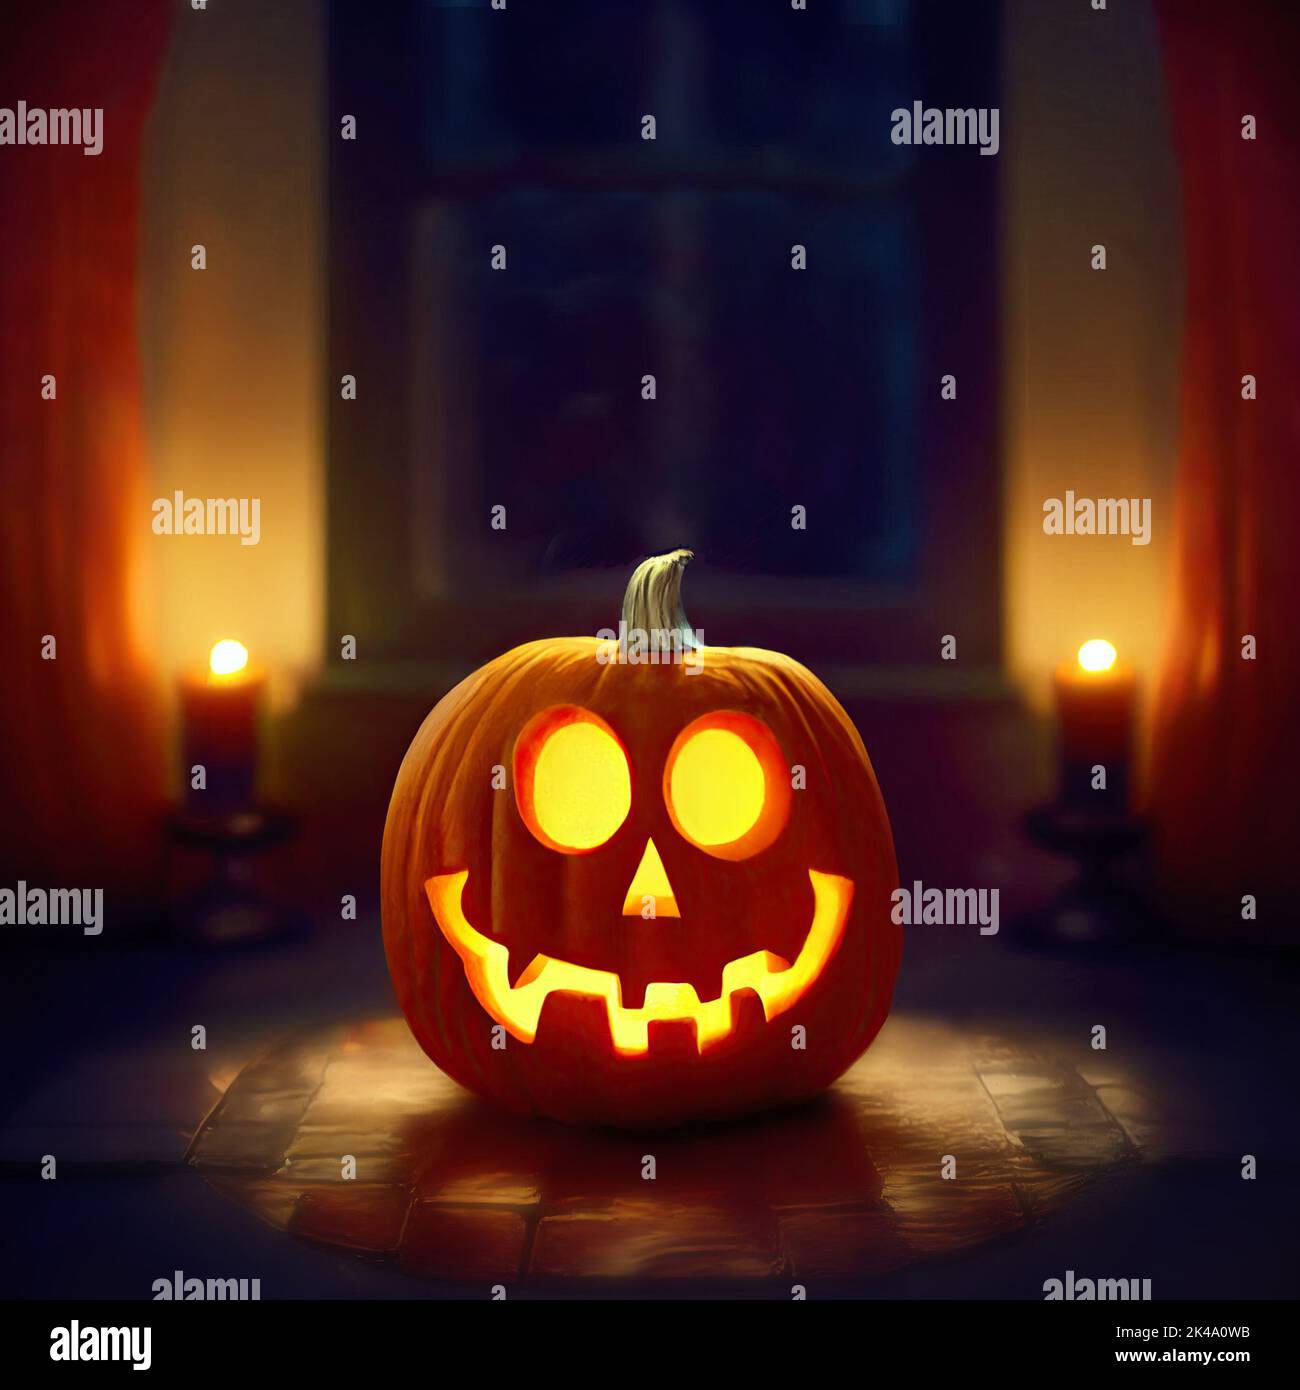 Smiling Halloween pumpkin with glowing eyes on a table in a dark room lit with candles. Digital illustration with copy space Stock Photo